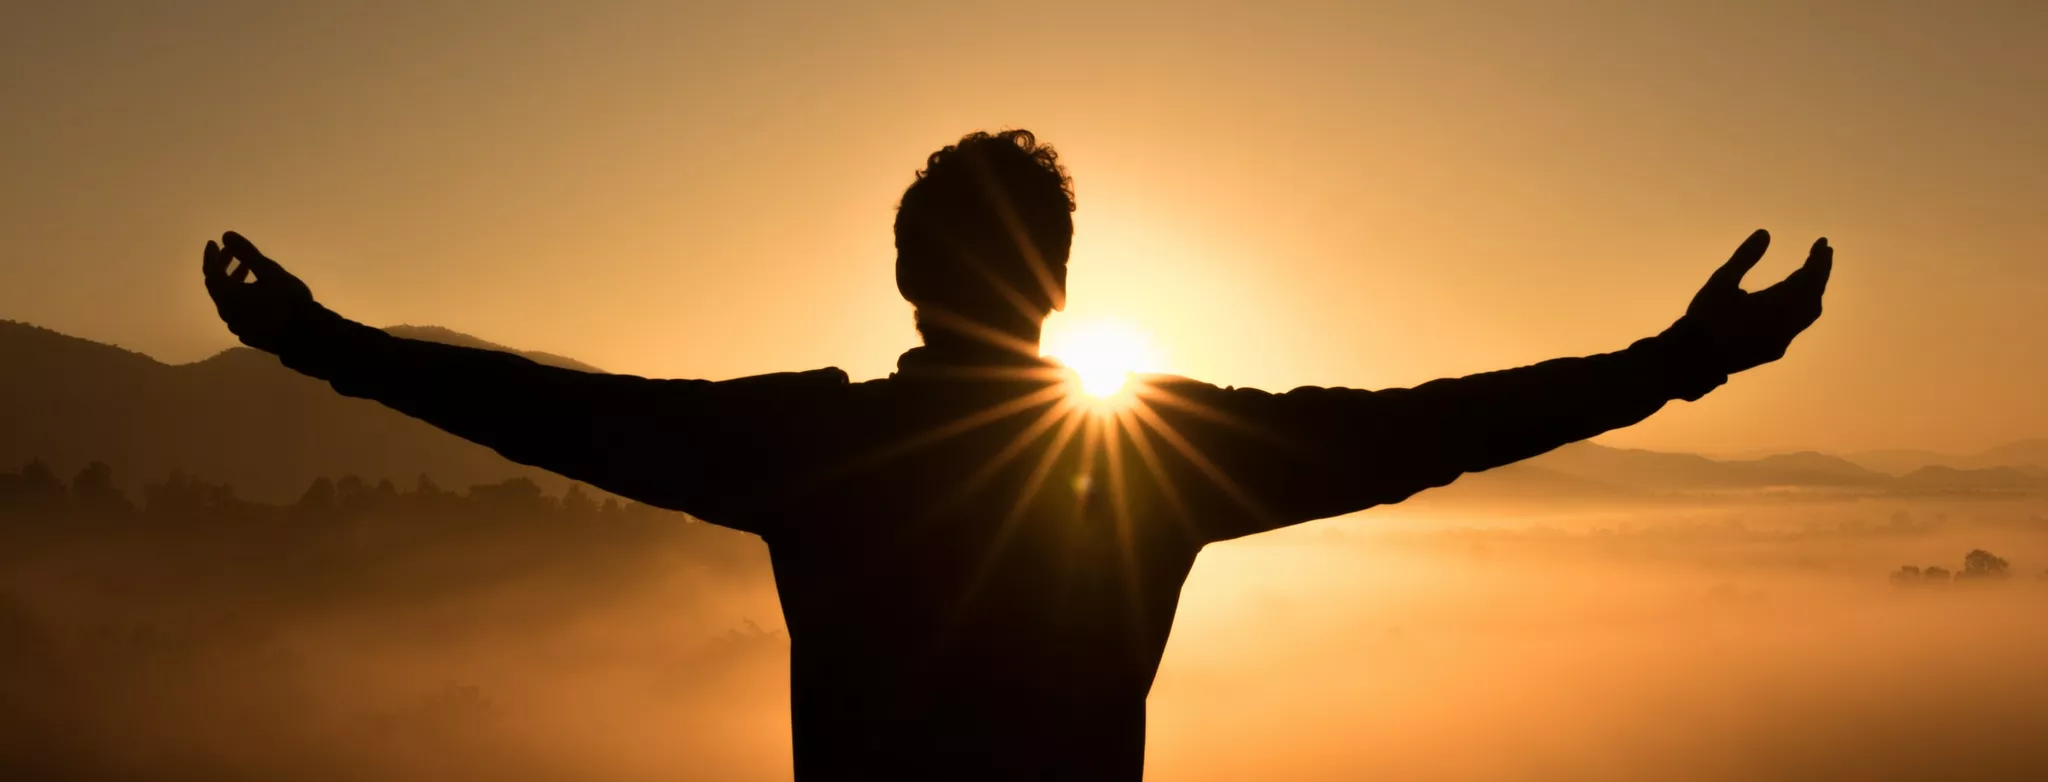 Photo of sunrise with man posing in an embrace